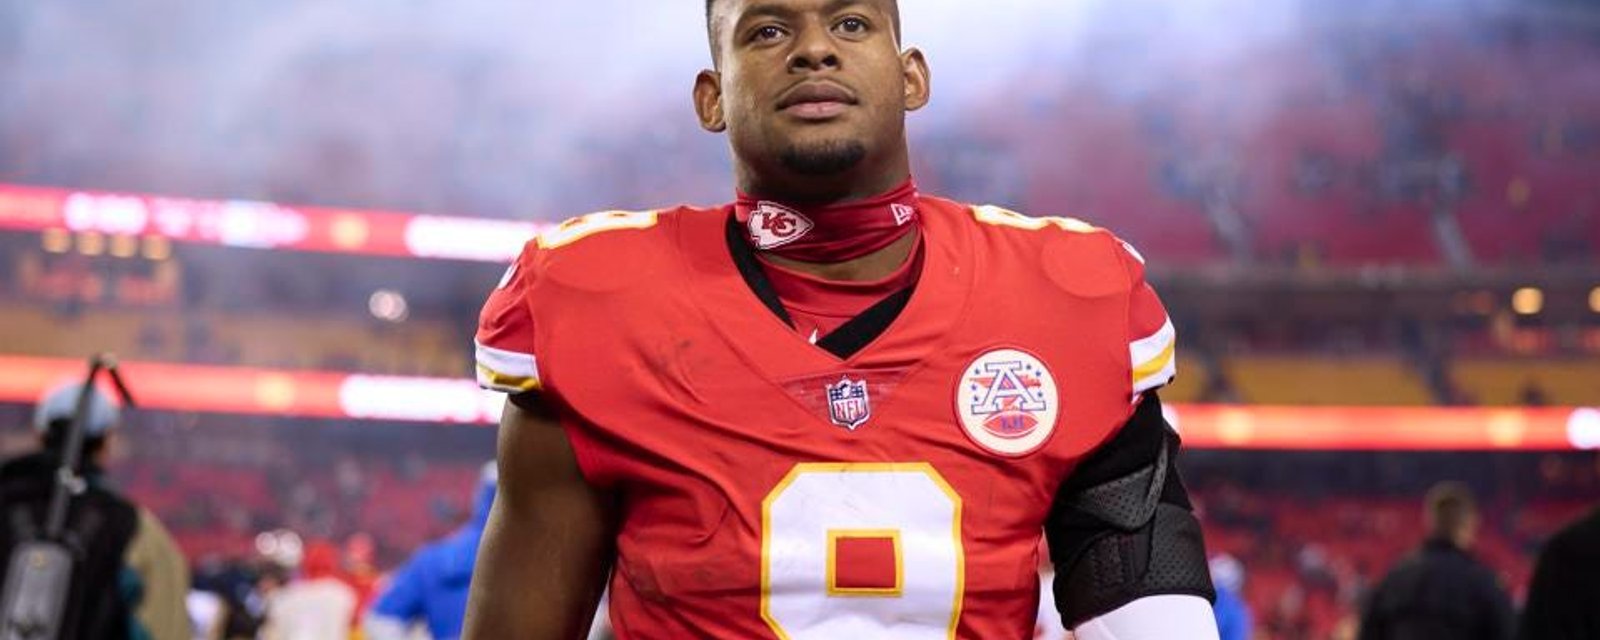 JuJu Smith-Schuster leaves Chiefs after winning Superbowl 